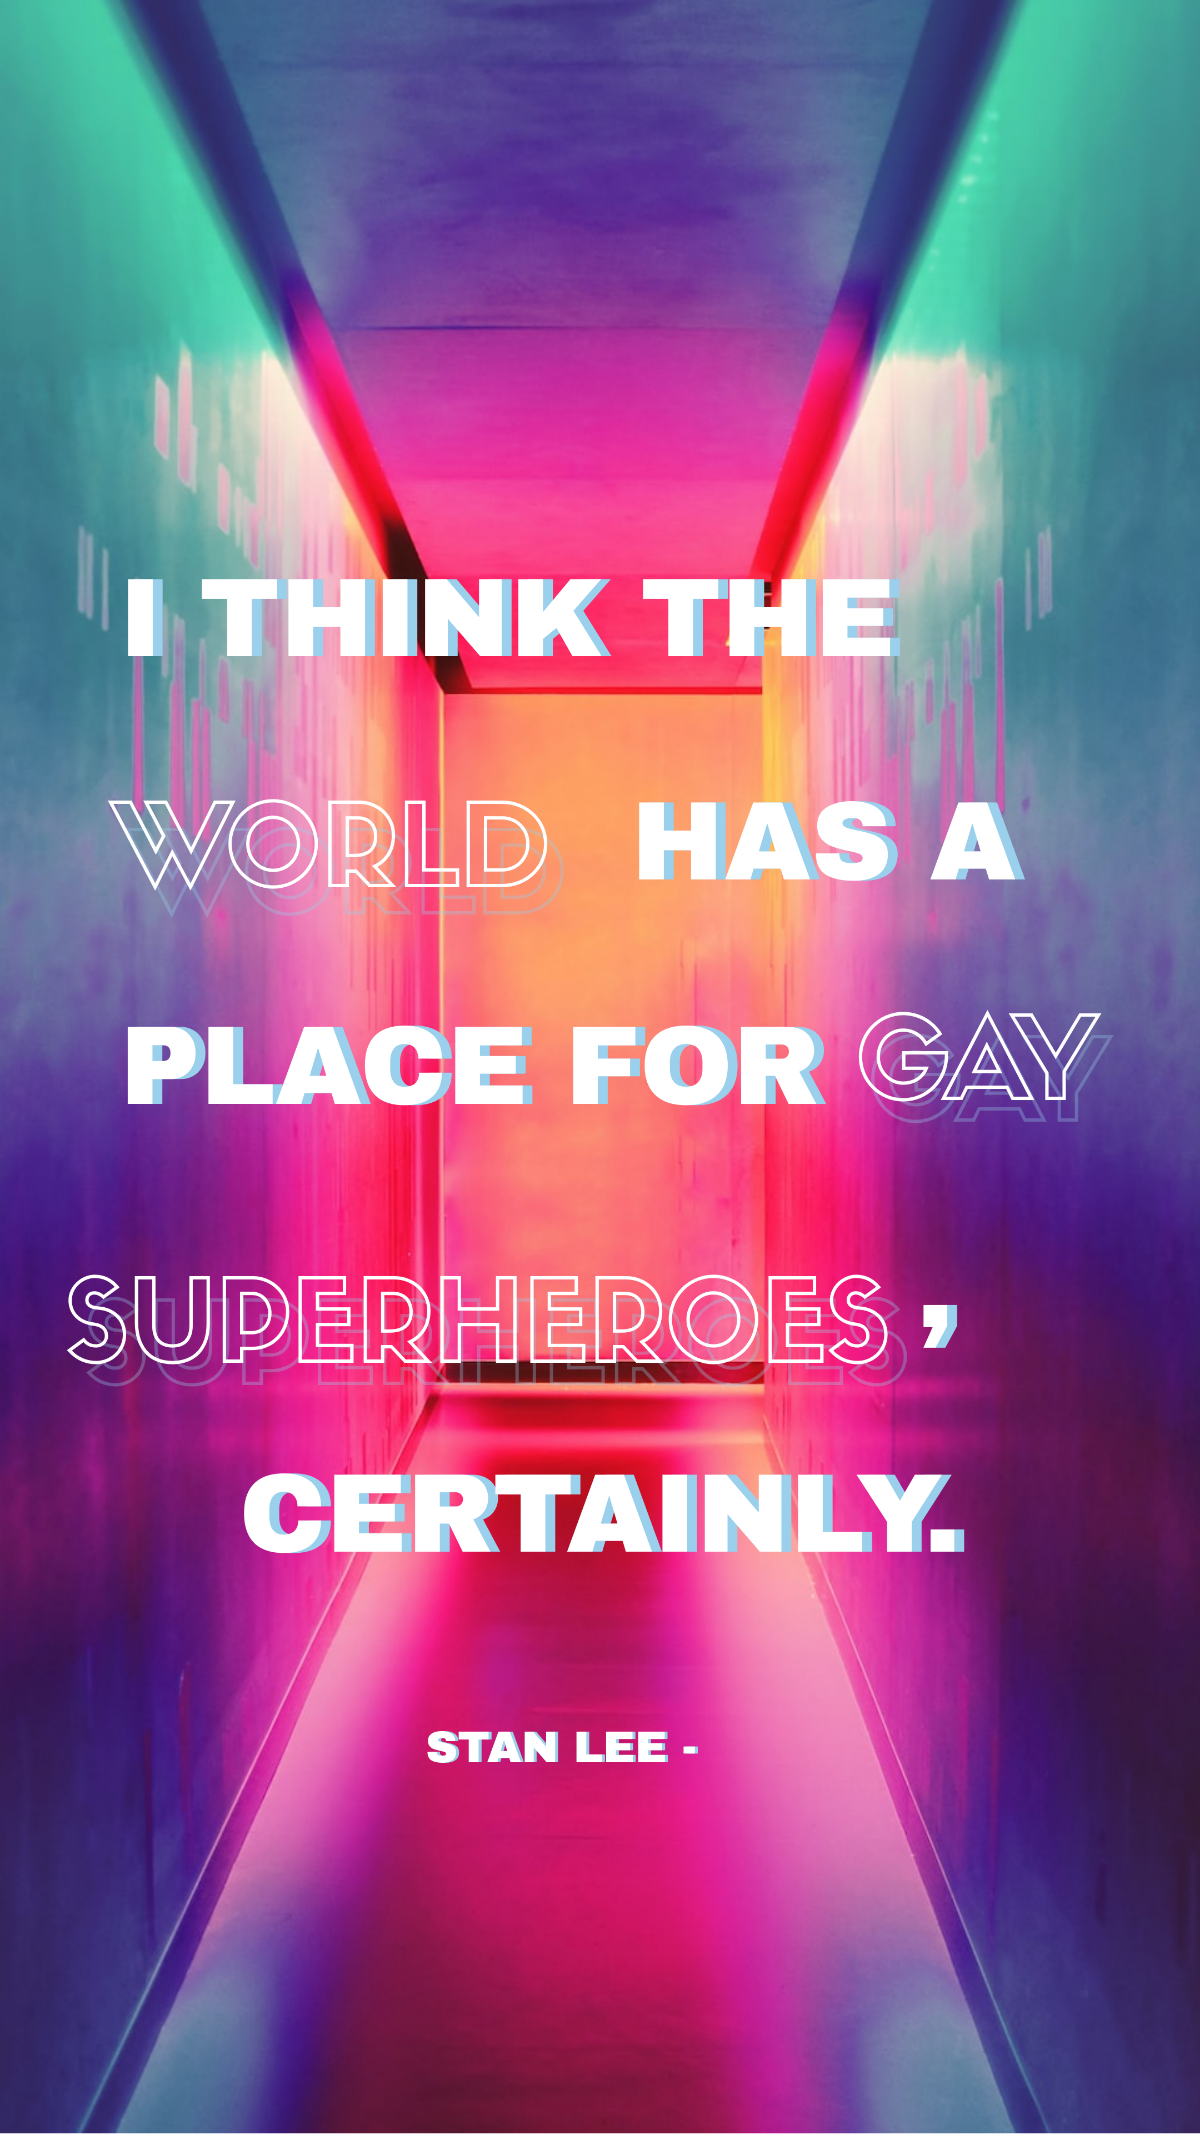 Stan Lee - I think the world has a place for gay superheroes, certainly. Template